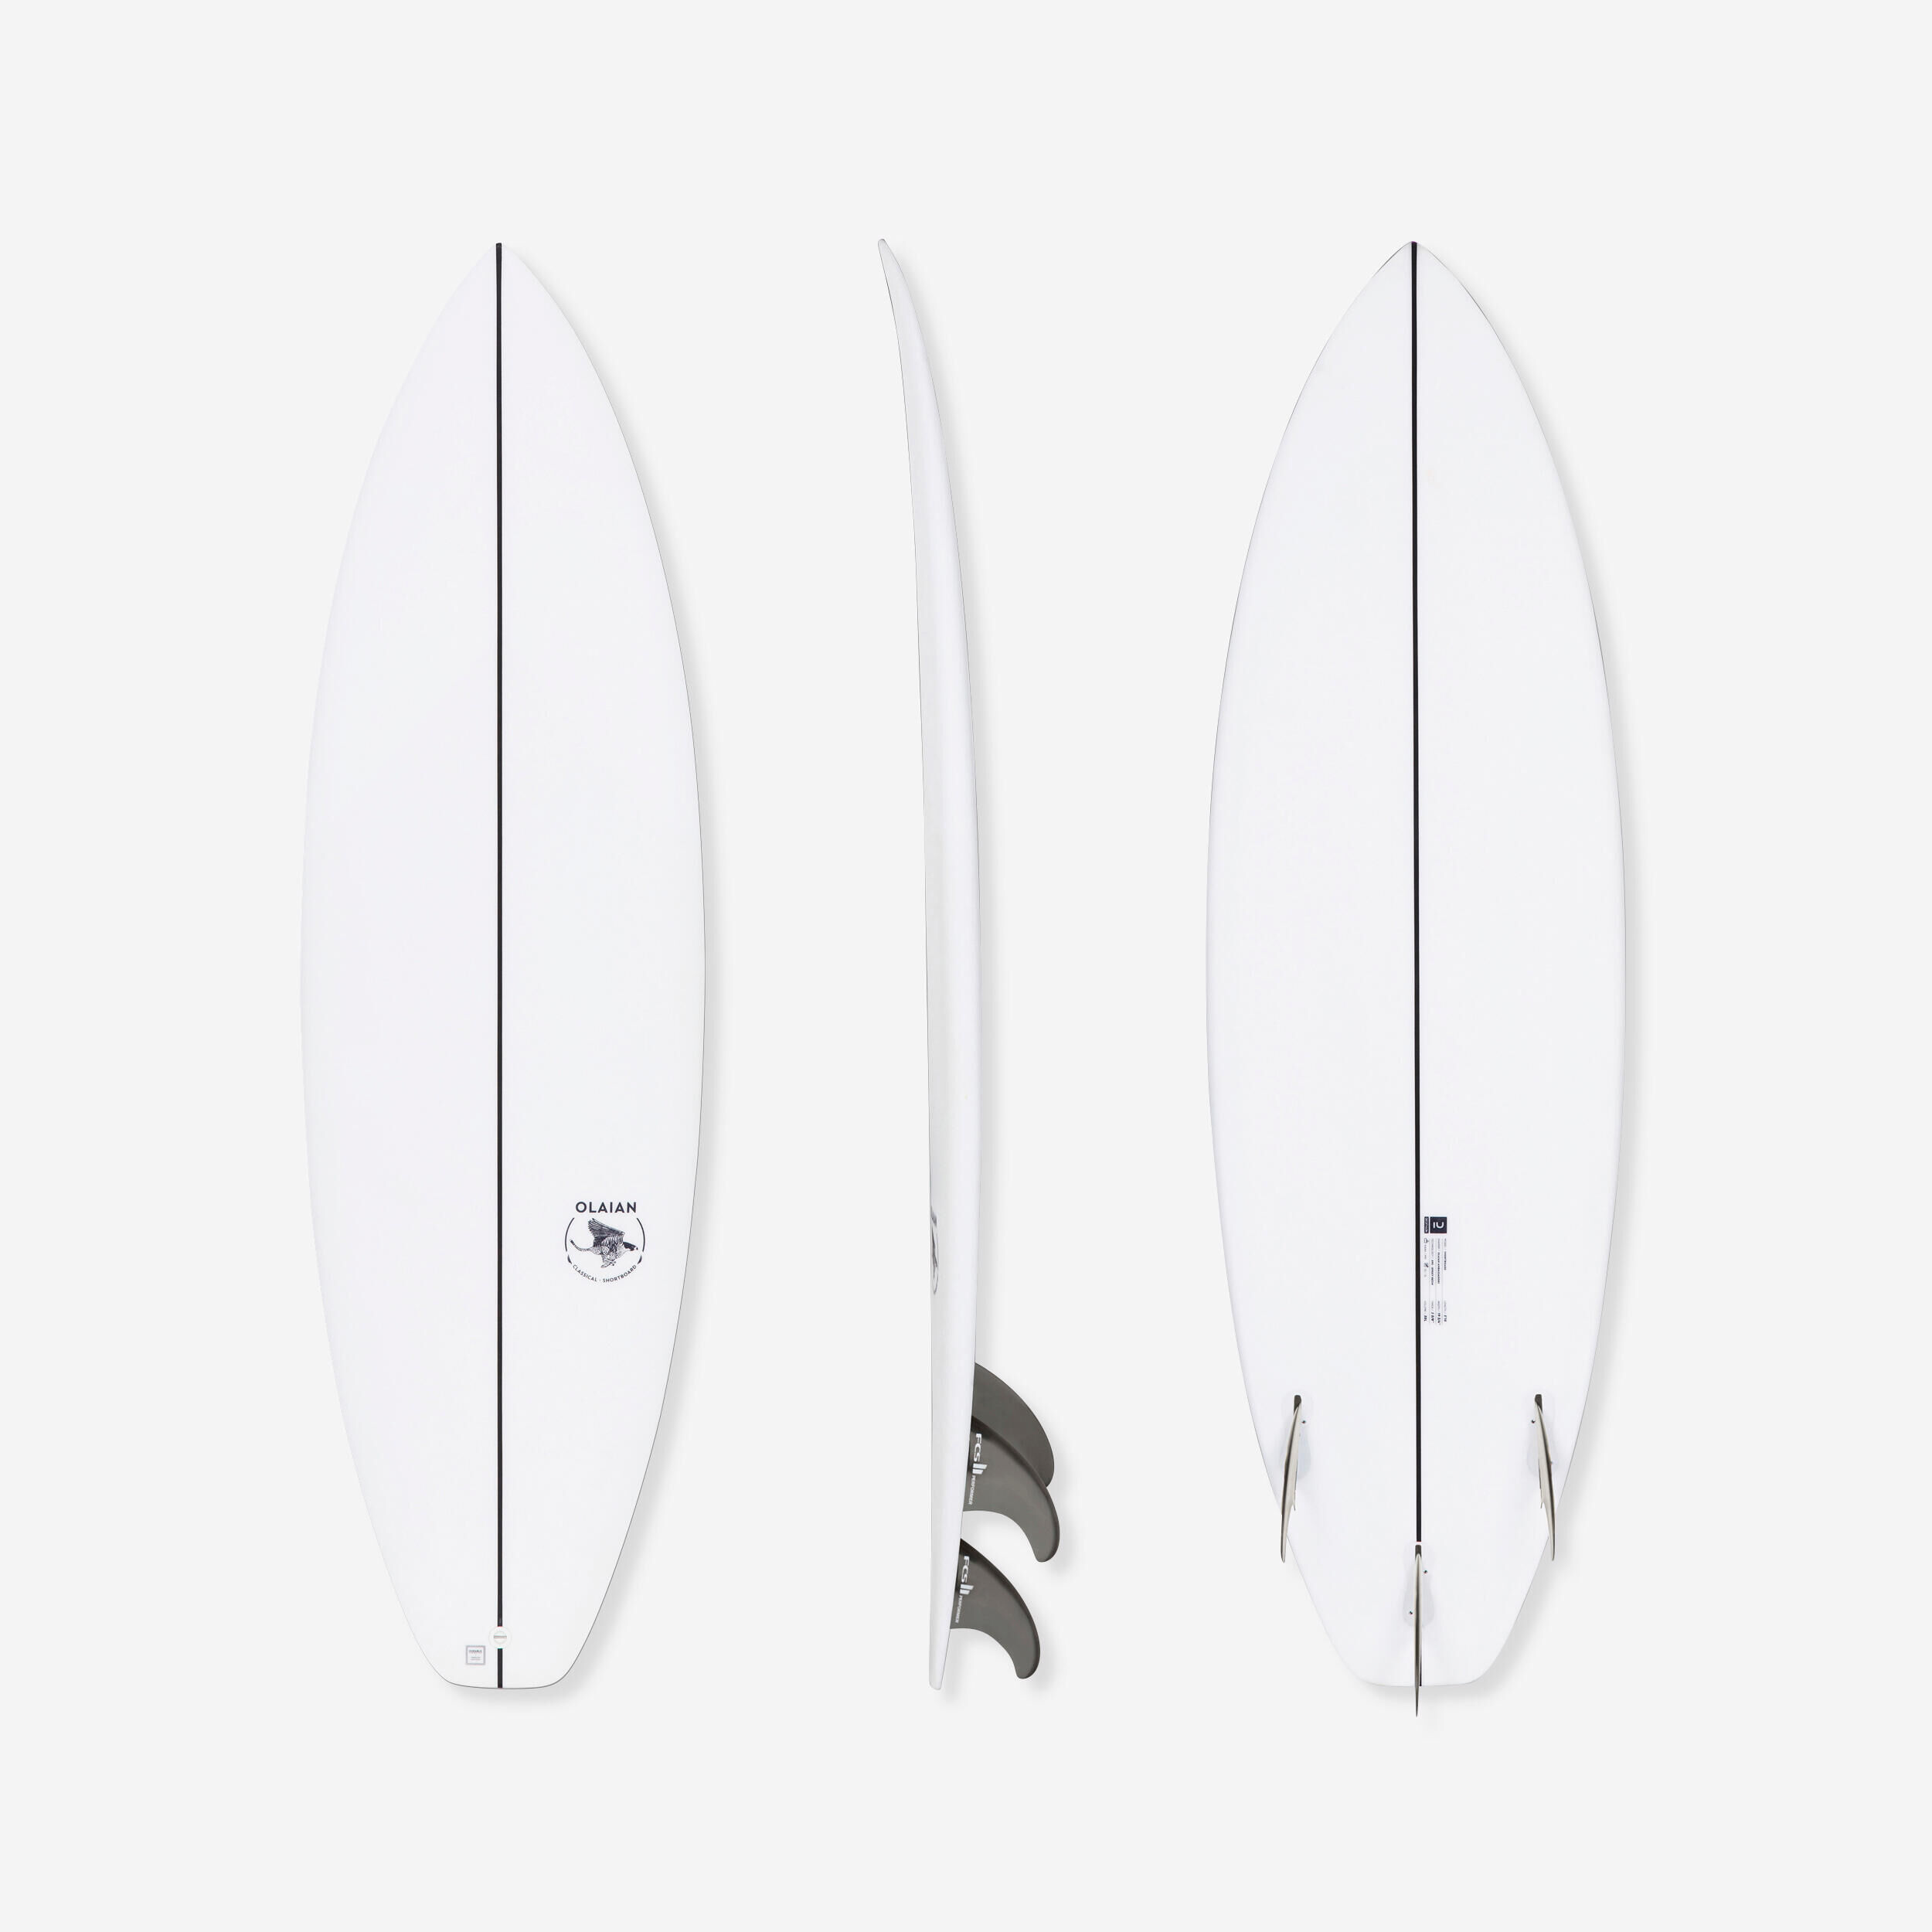 OLAIAN SHORTBOARD 900 5'10" 30 L. Supplied with 3 FCS2 fins